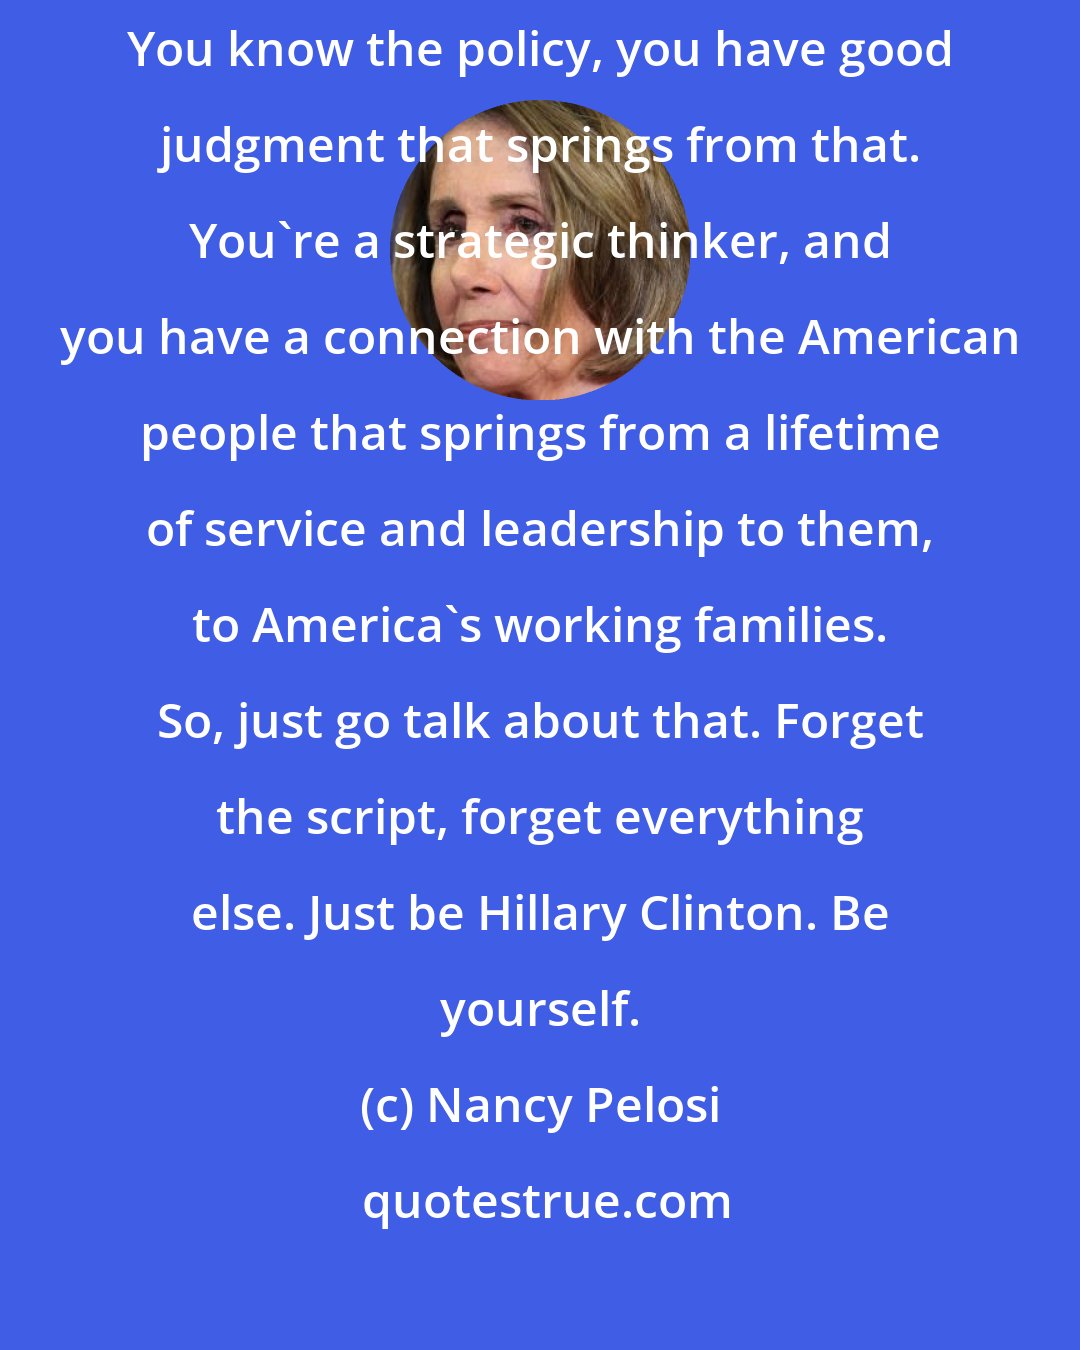 Nancy Pelosi: Be yourself. Hillary Clinton, you have a great vision for our country. You know the policy, you have good judgment that springs from that. You're a strategic thinker, and you have a connection with the American people that springs from a lifetime of service and leadership to them, to America's working families. So, just go talk about that. Forget the script, forget everything else. Just be Hillary Clinton. Be yourself.